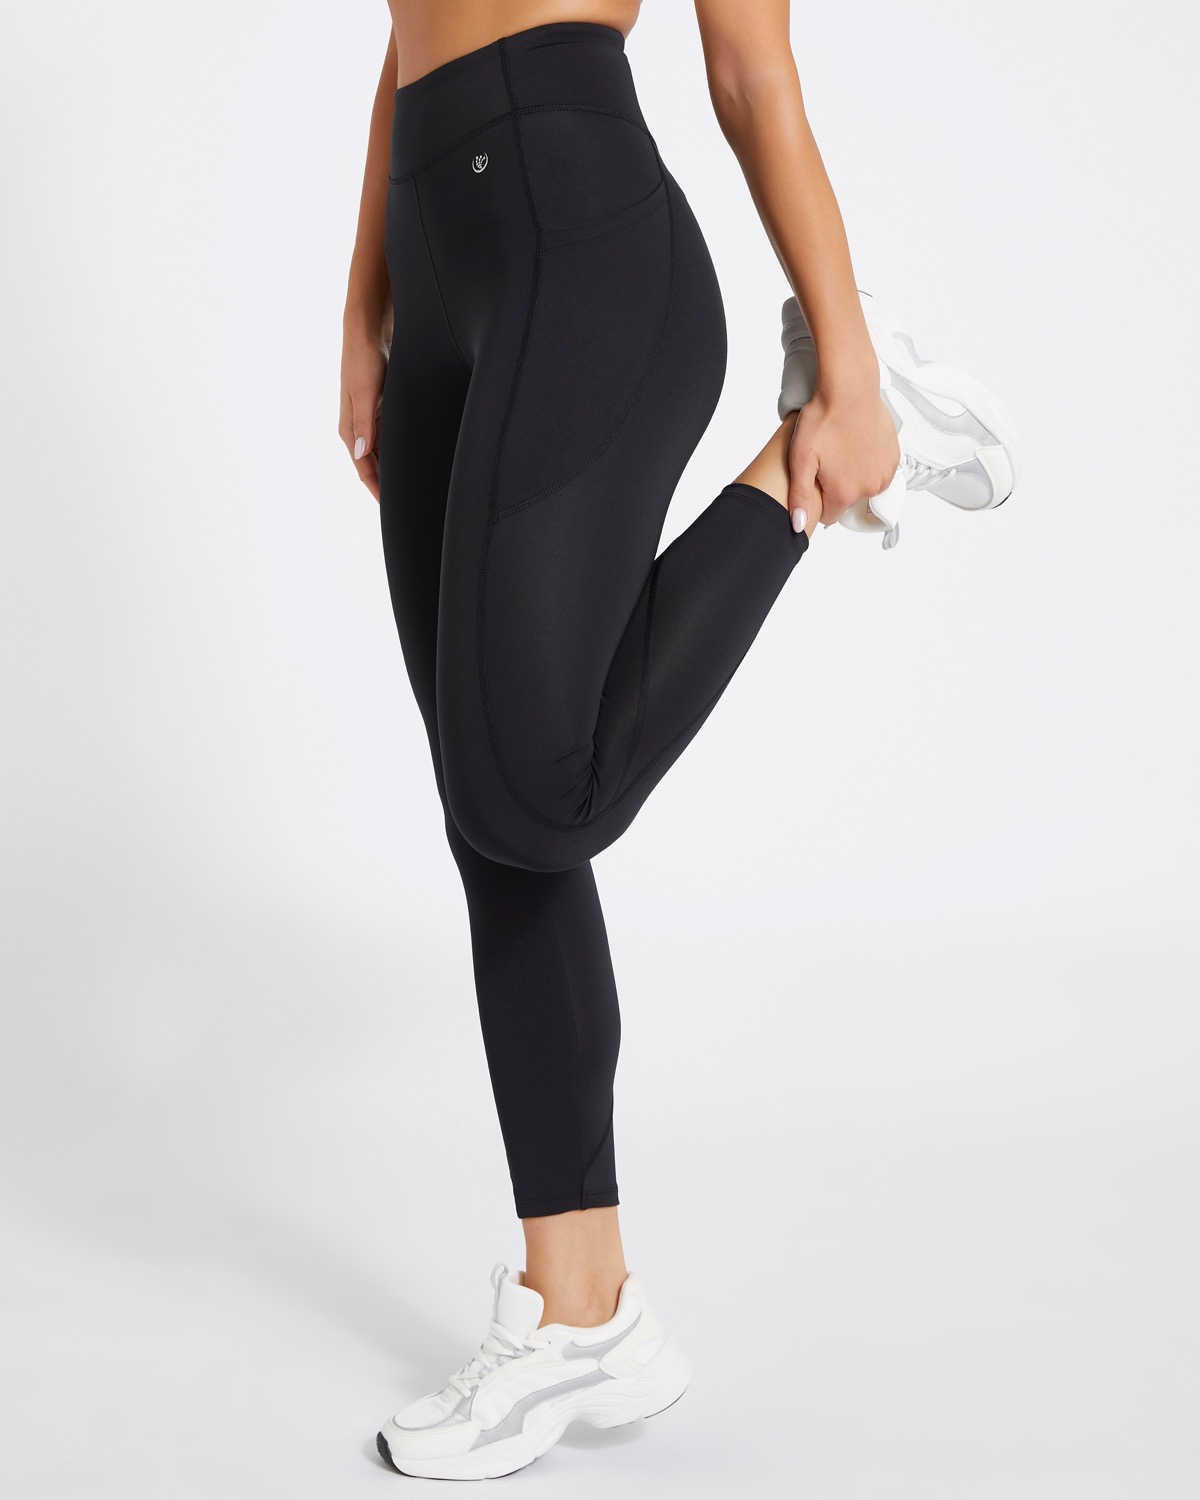 Dunnes Stores fans set to go wild for lightweight thermals from €8 -  including extra warm leggings